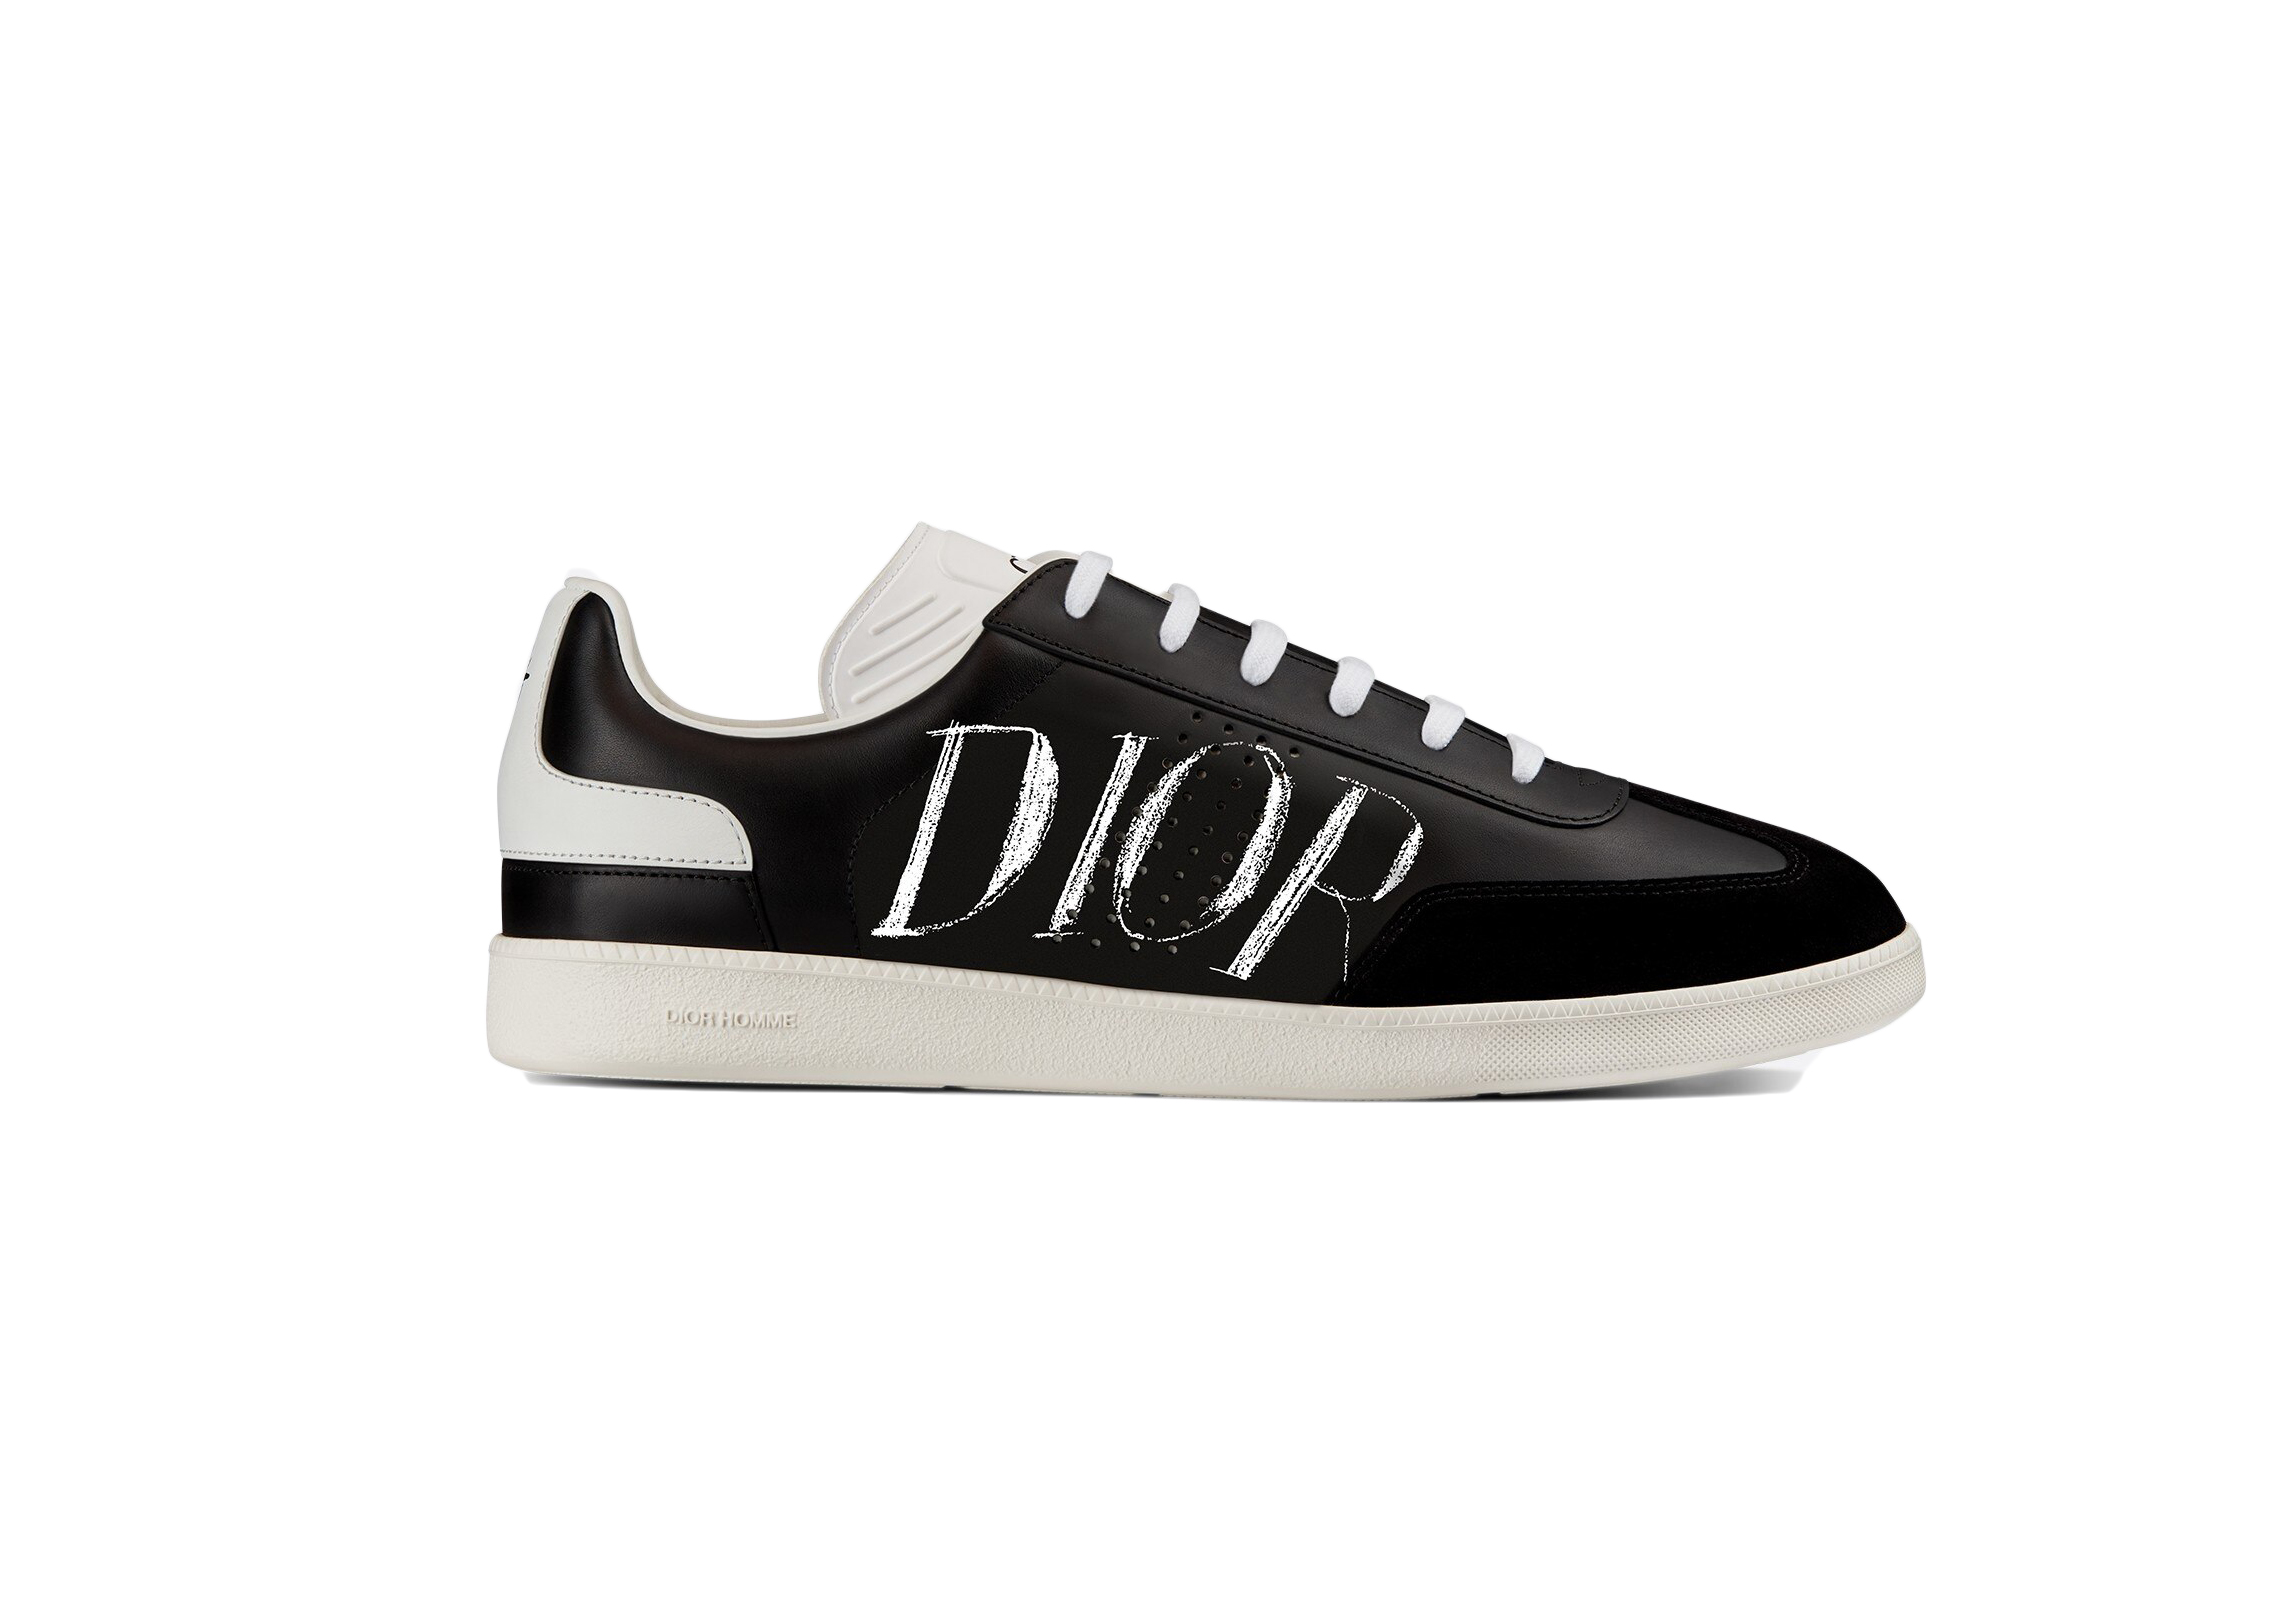 Dior Homme B01 Sneakers  Blue Sneakers Shoes  HMM44457  The RealReal